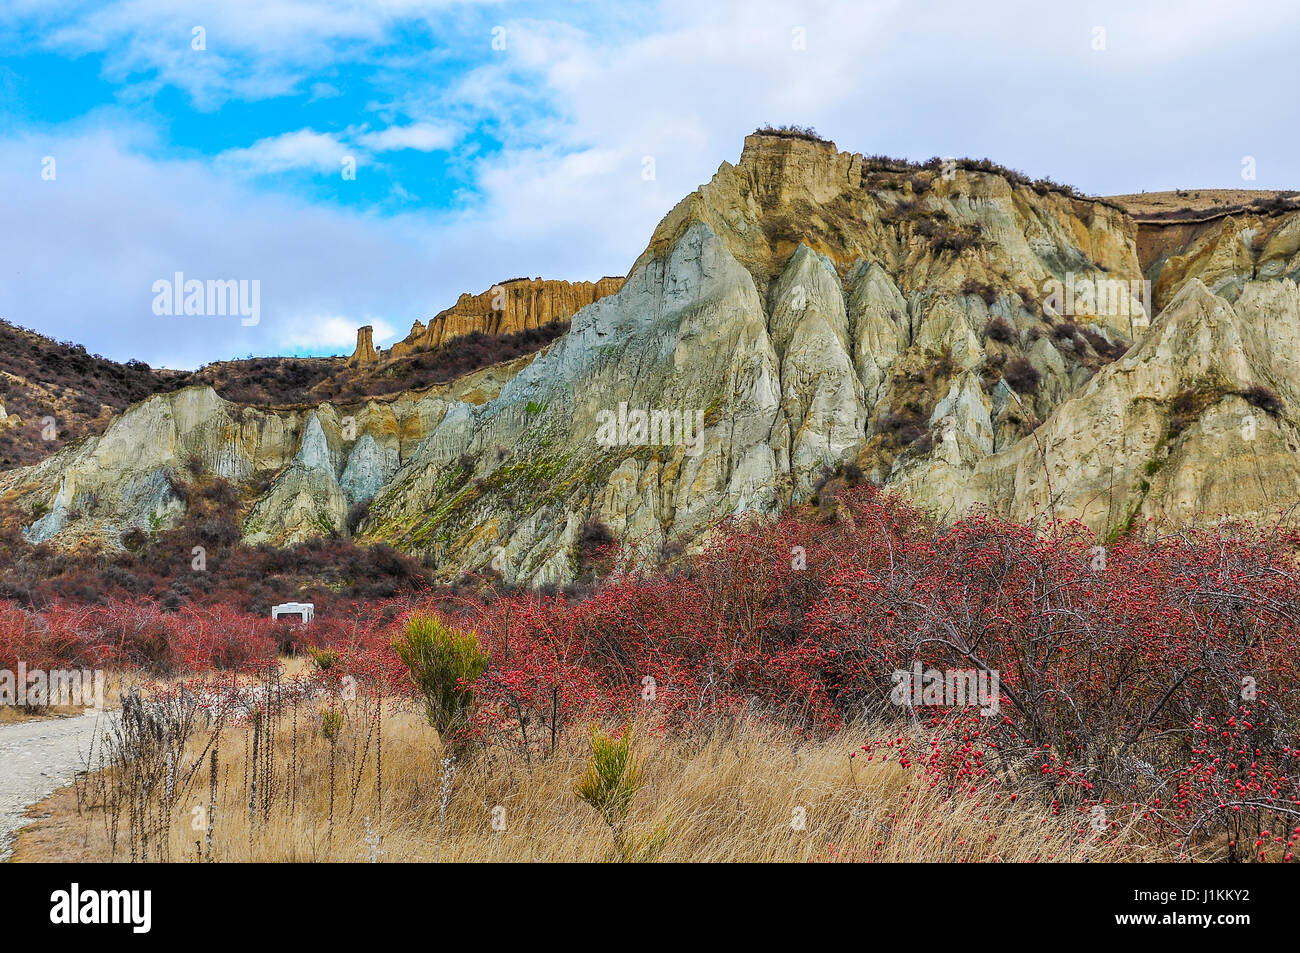 The geological formation of Clay Cliffs near Omarama, New Zealand Stock Photo